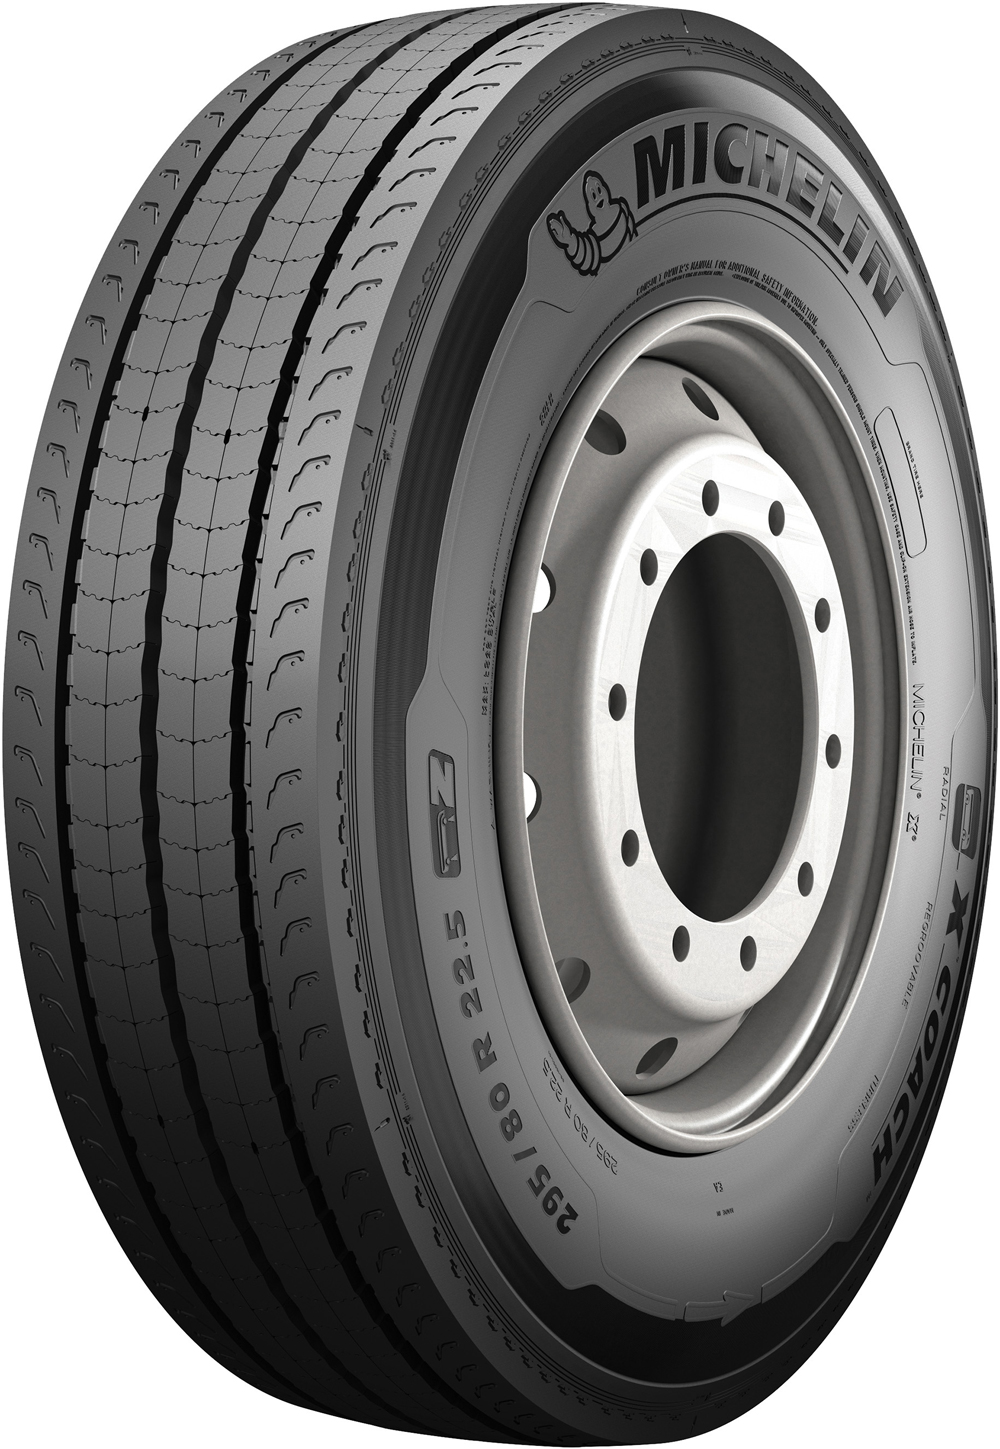 product_type-heavy_tires MICHELIN X COACH Z 295/80 R22.5 154M